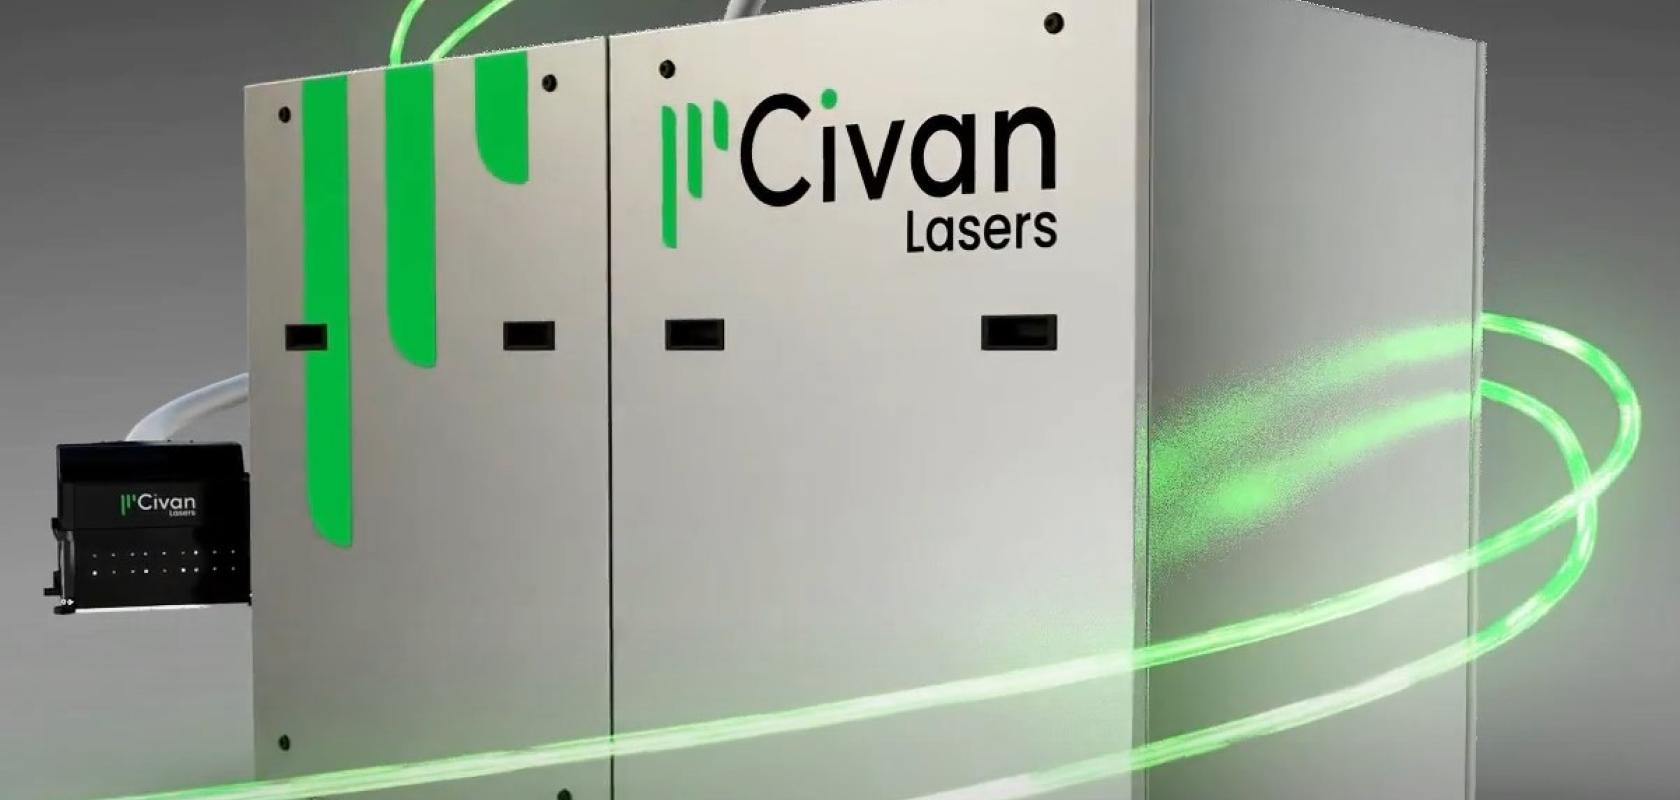 The Dynamic Beam Laser (DBL) from Civan Lasers